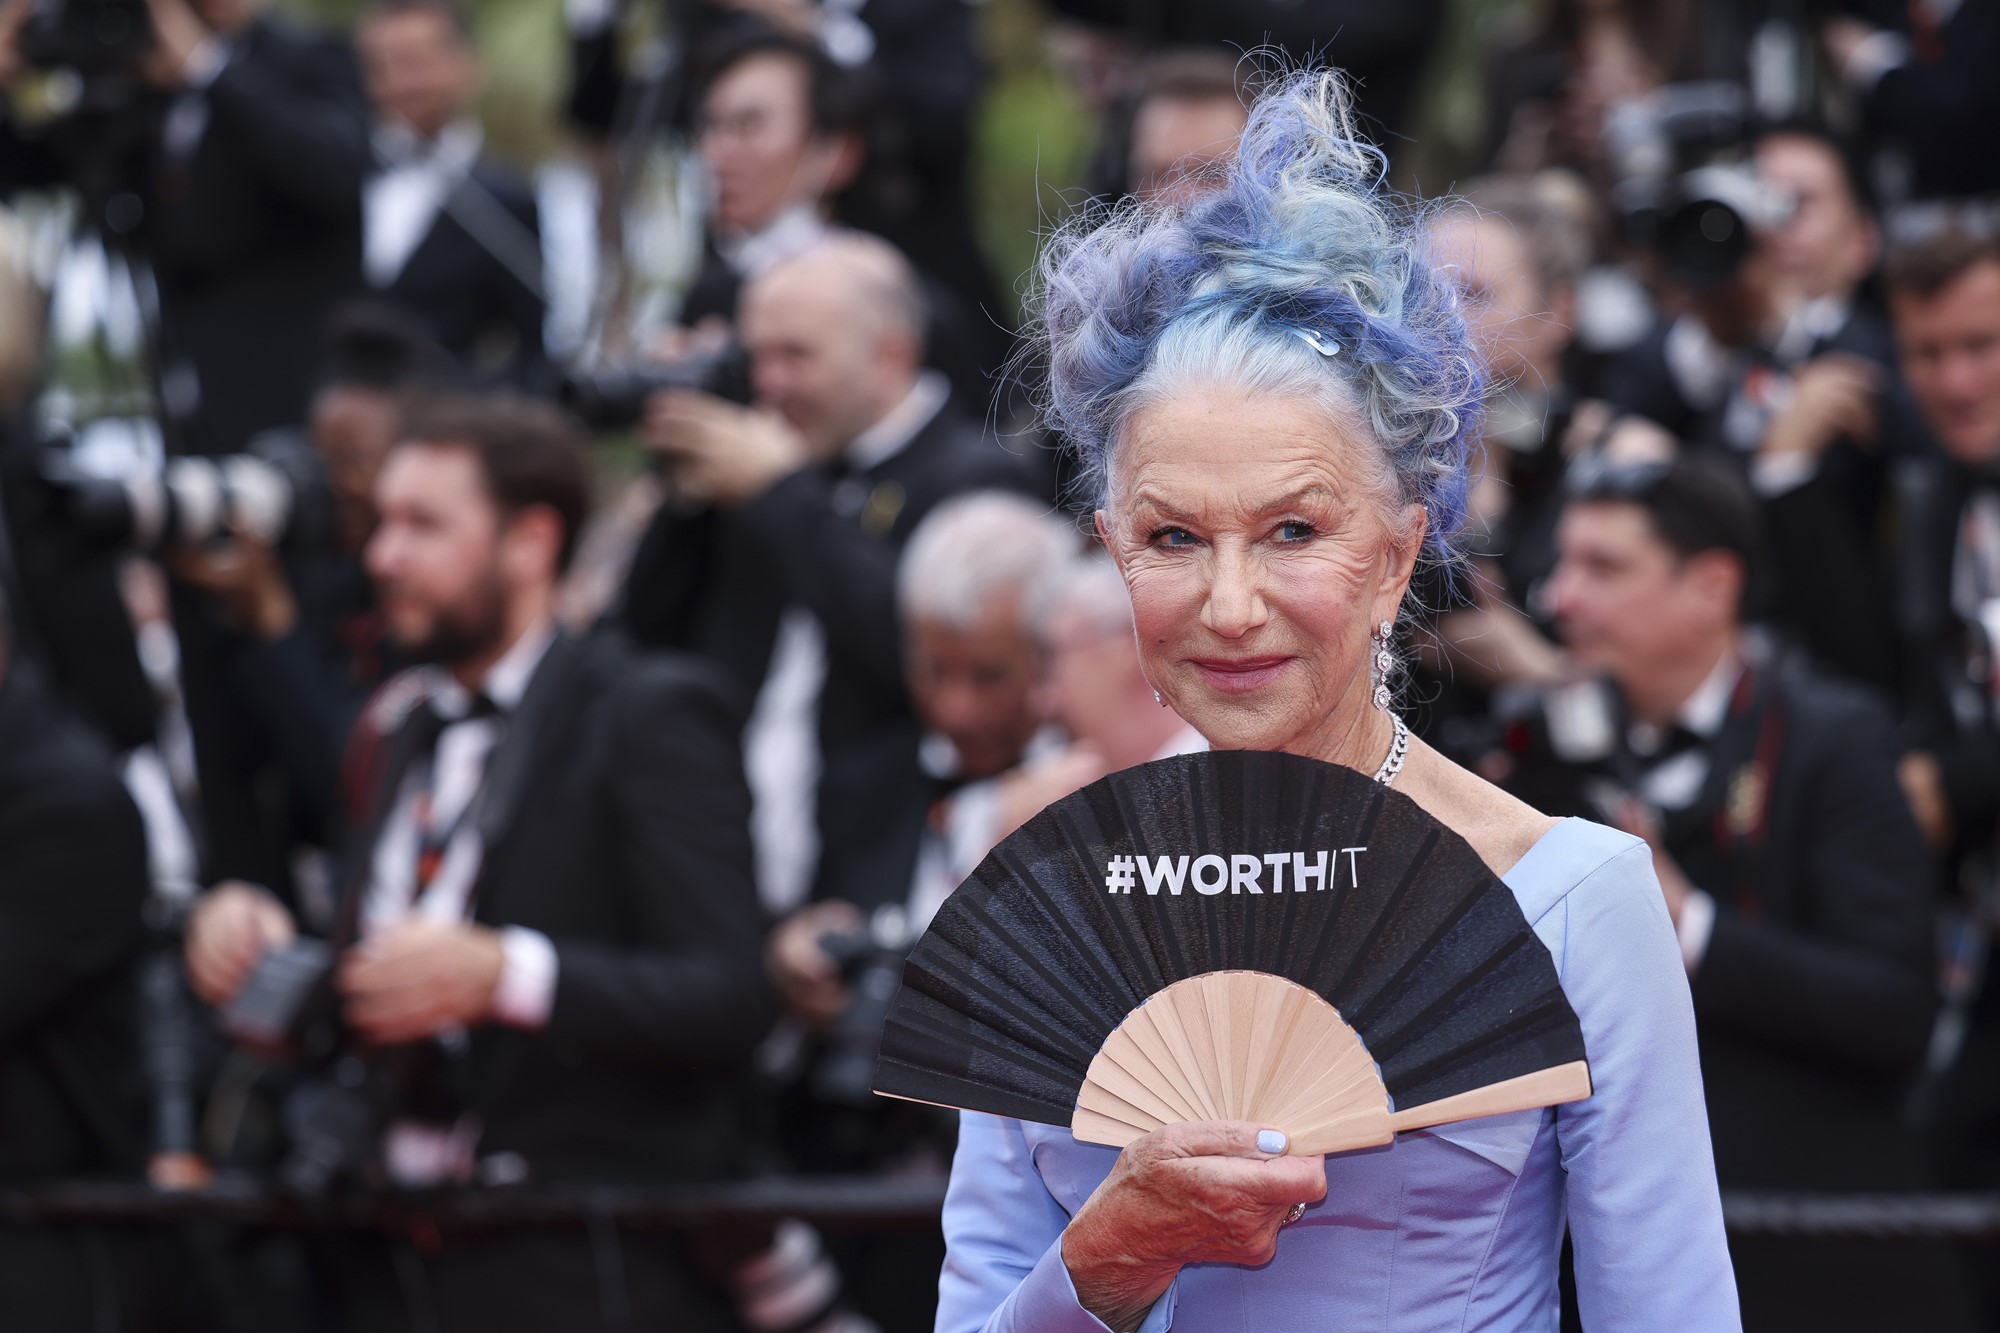 Actor Helen Mirren holding a hand fan with #WorthIt written on it. Photographers are grouped behind her